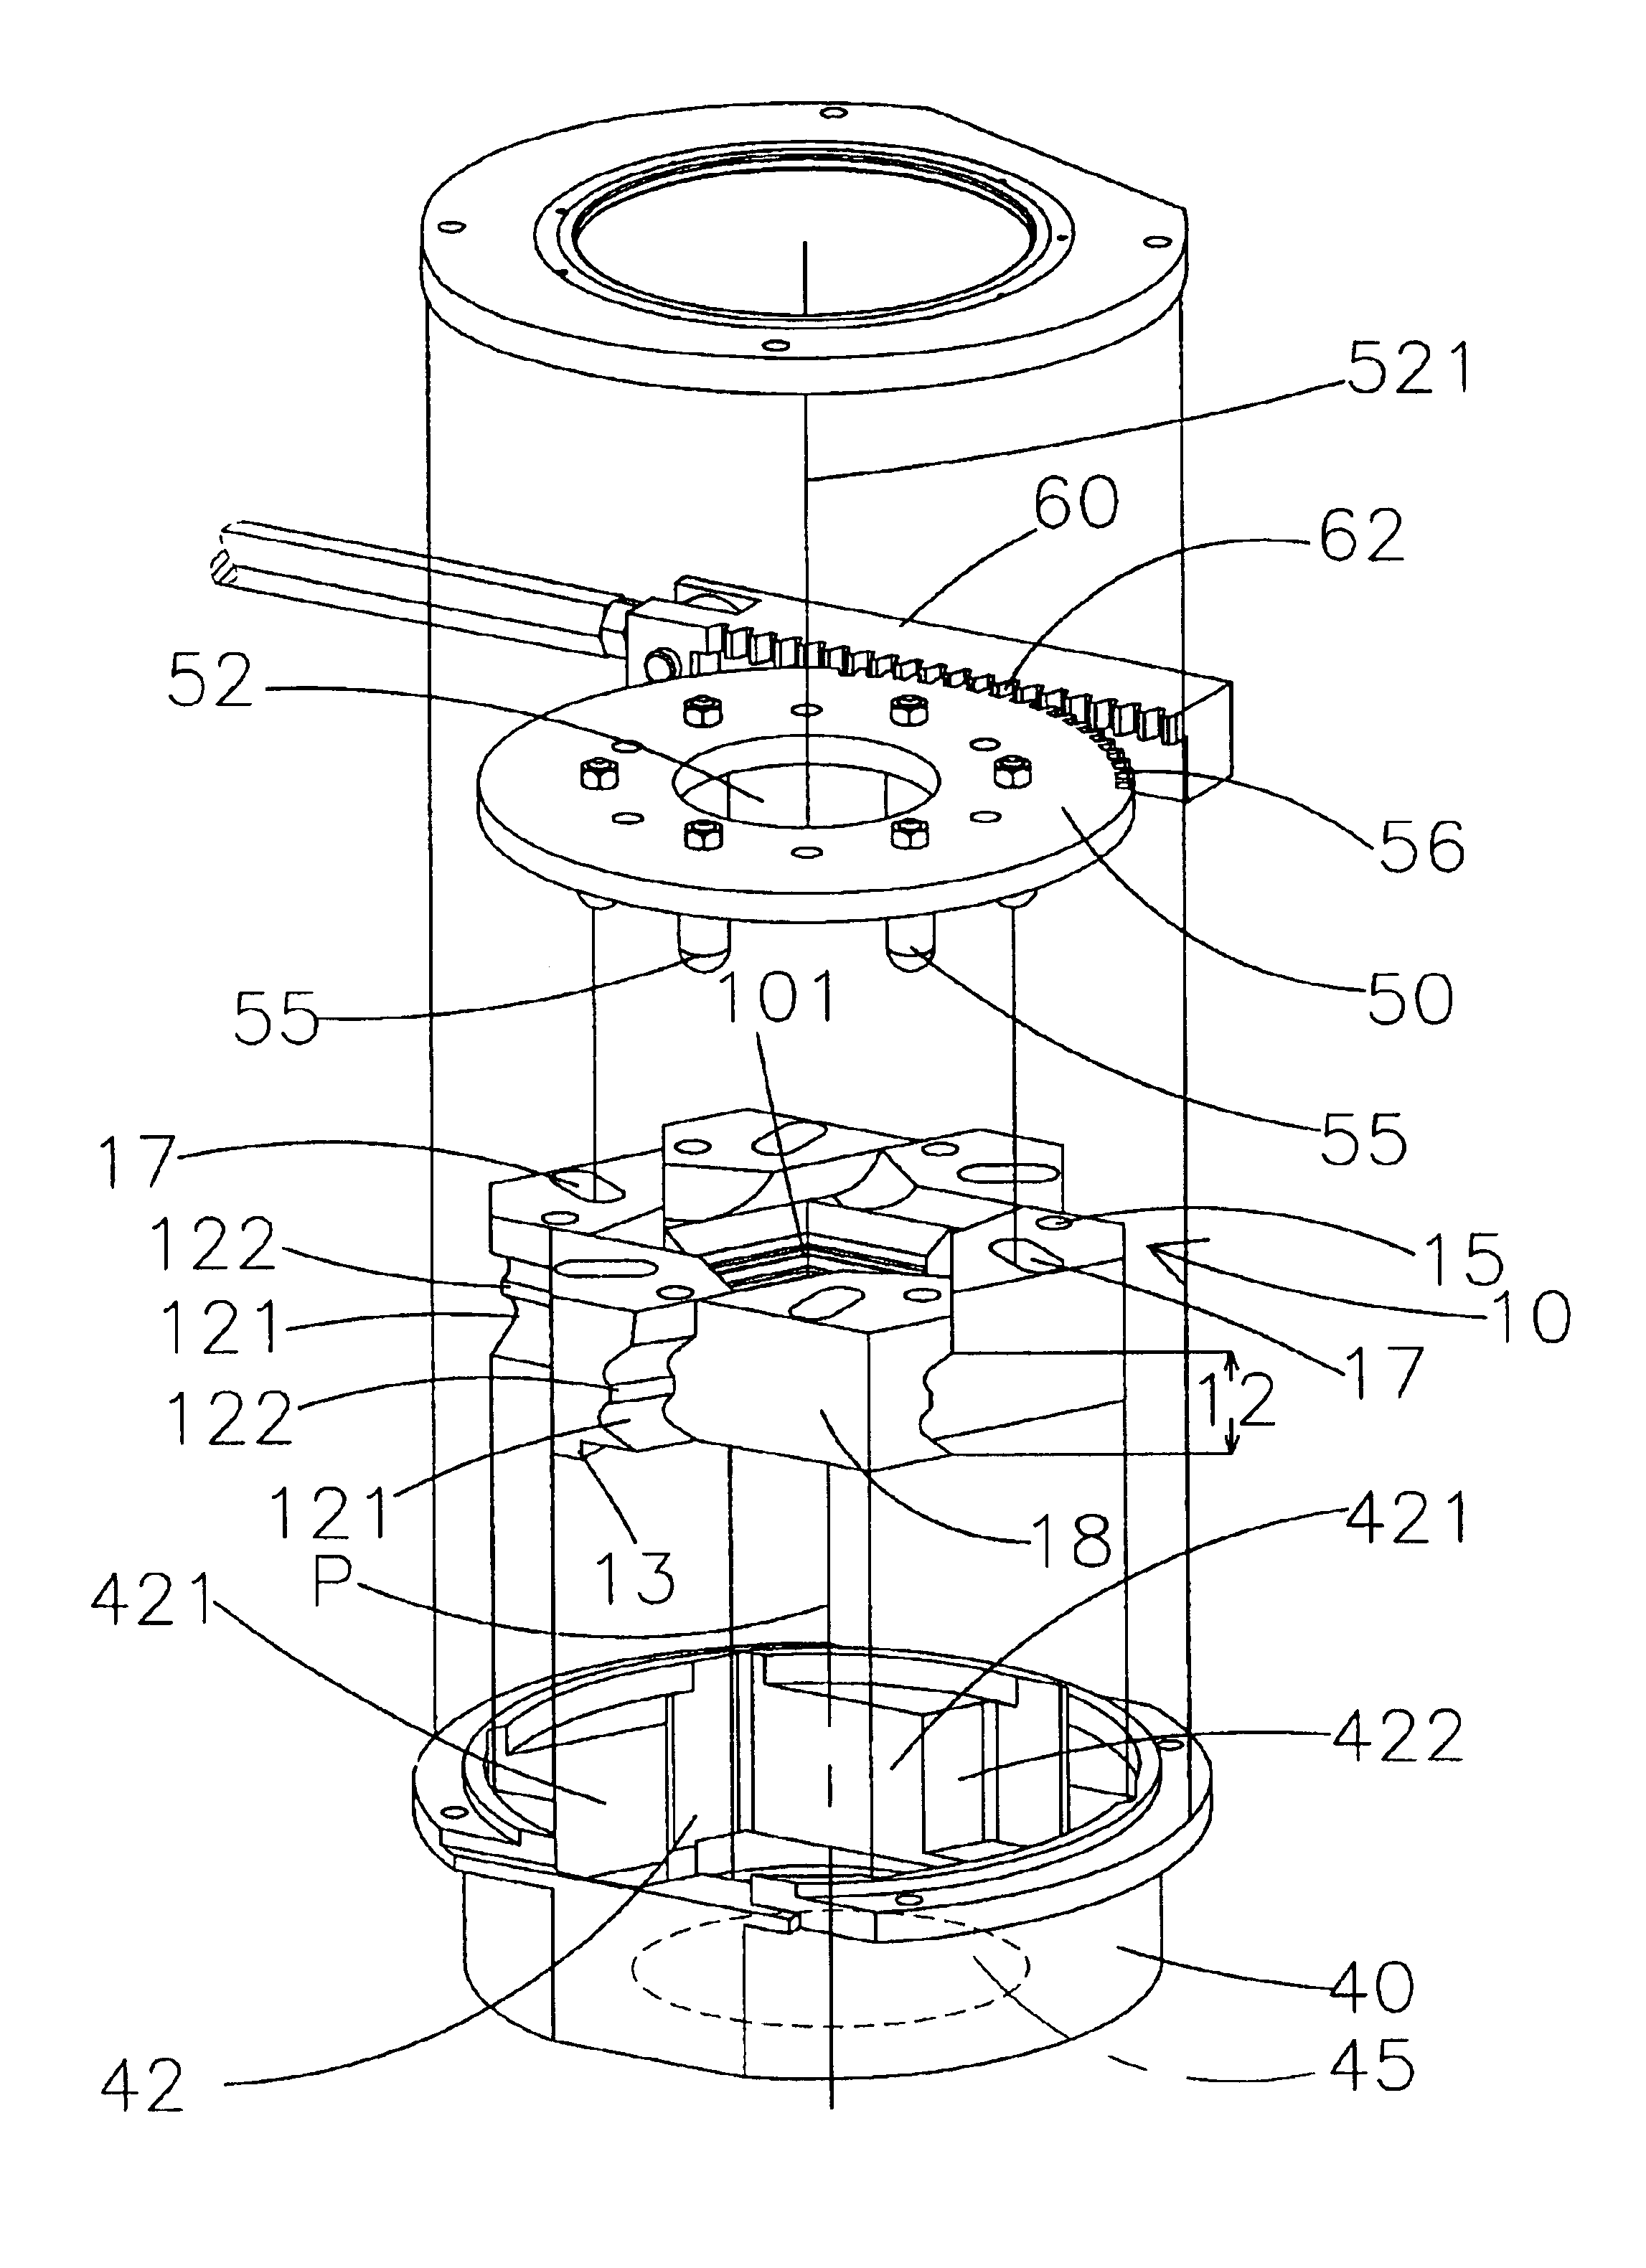 Device for molding spheroidal food products